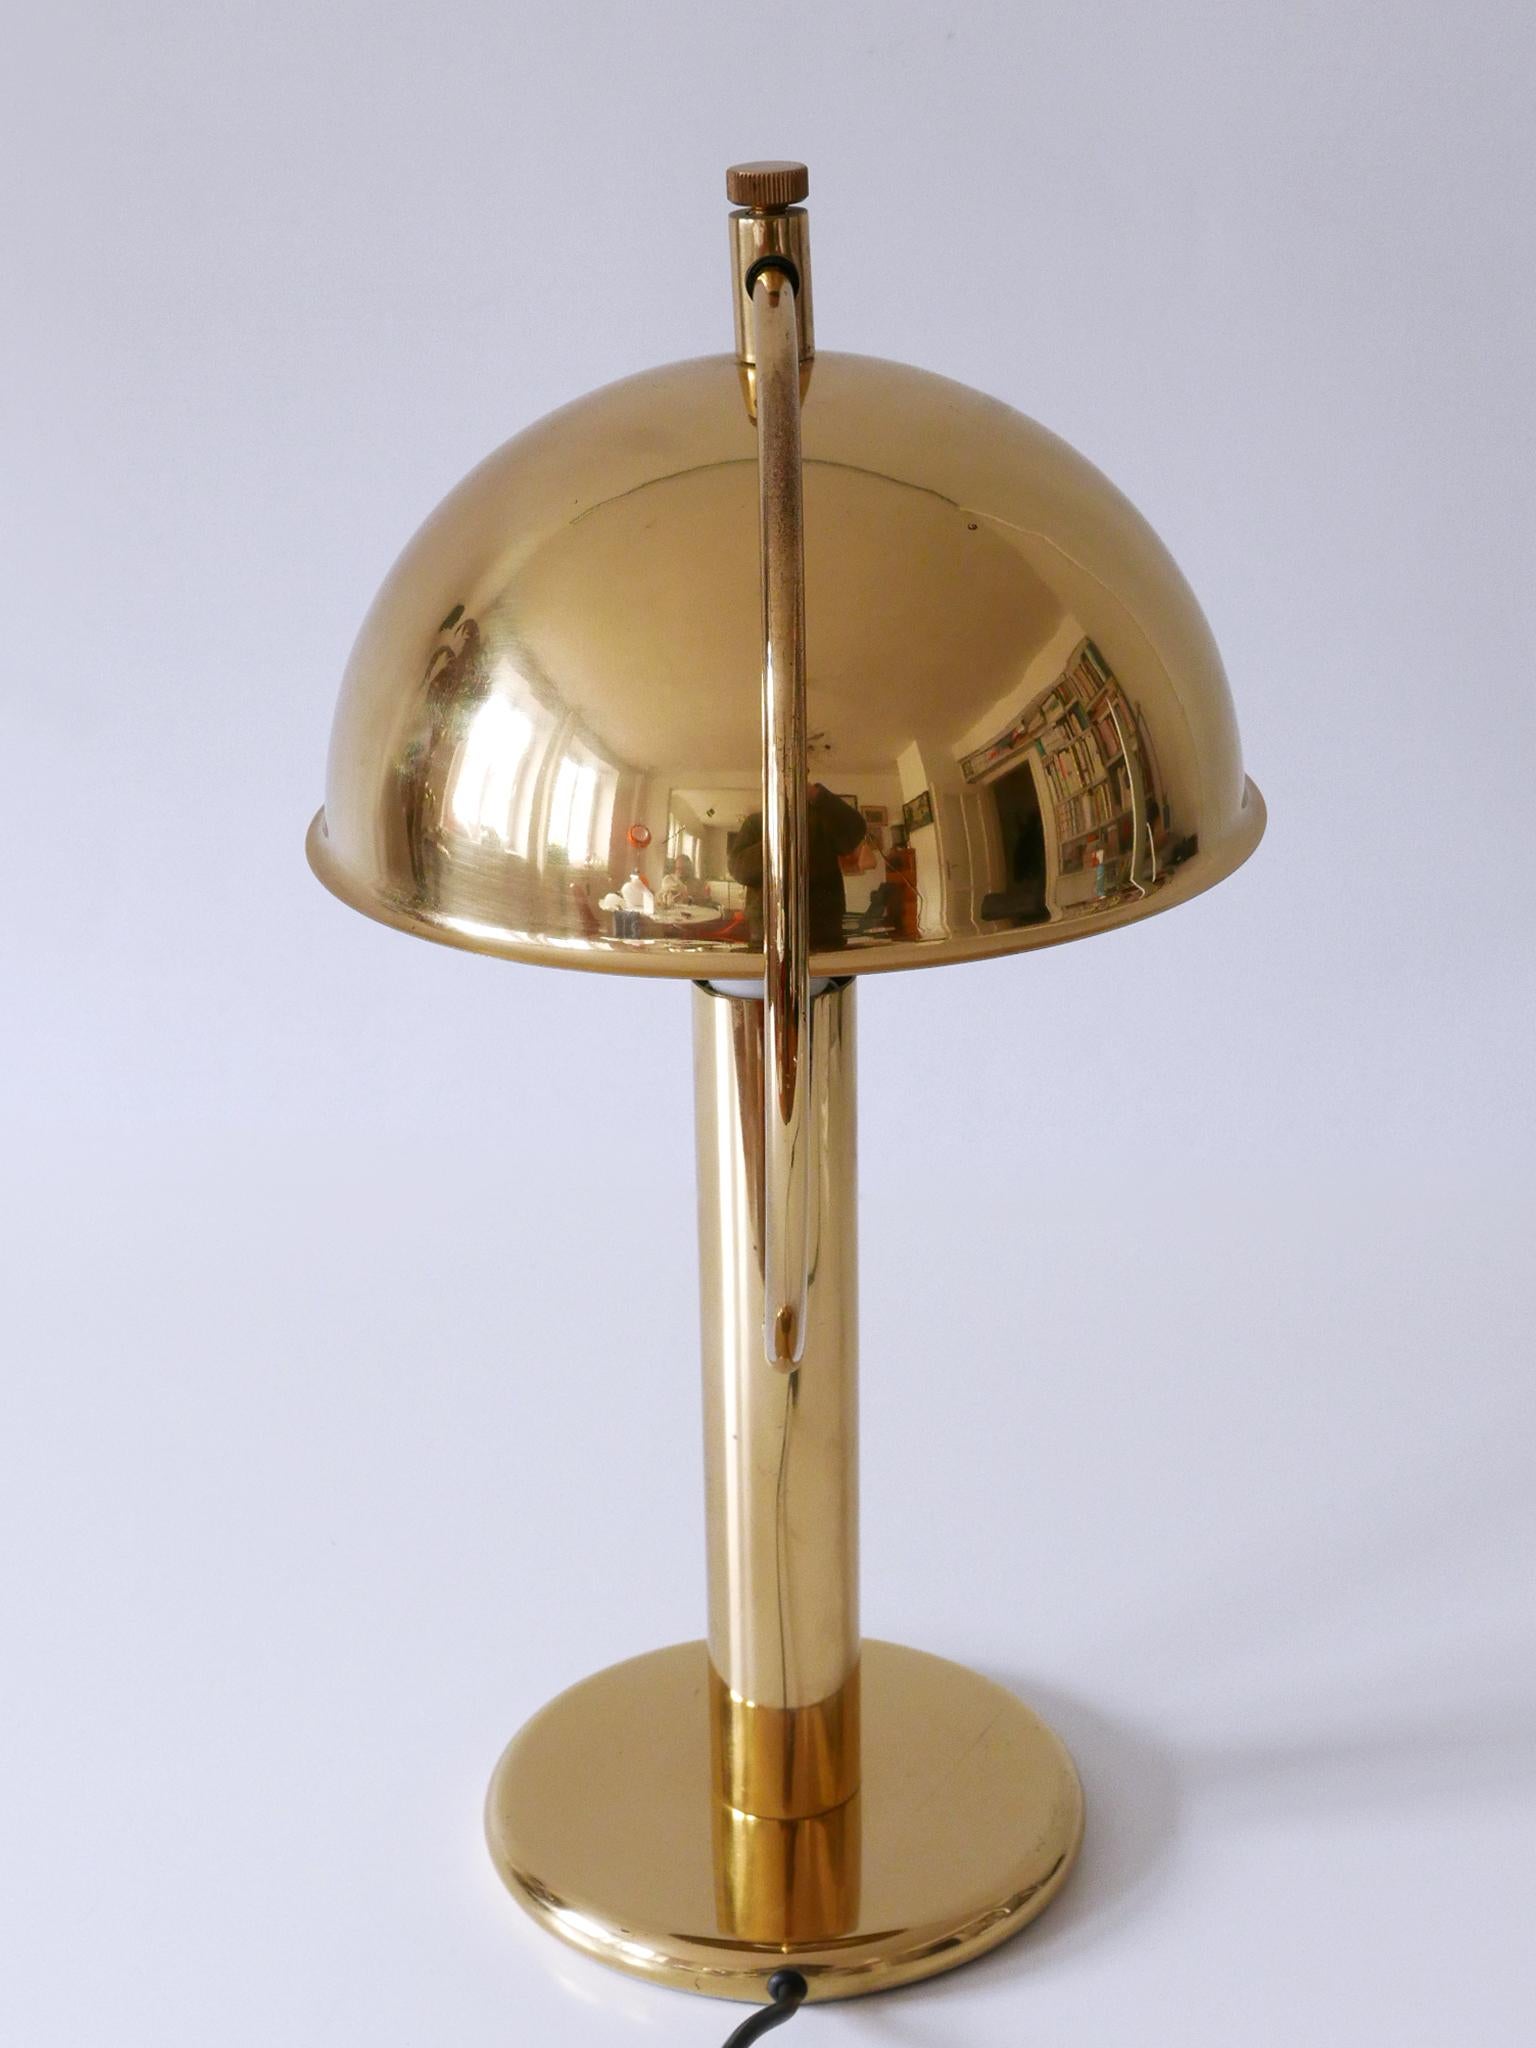 Exceptional Mid-Century Modern Brass Table Lamp by Gebrüder Cosack Germany 1960s For Sale 14